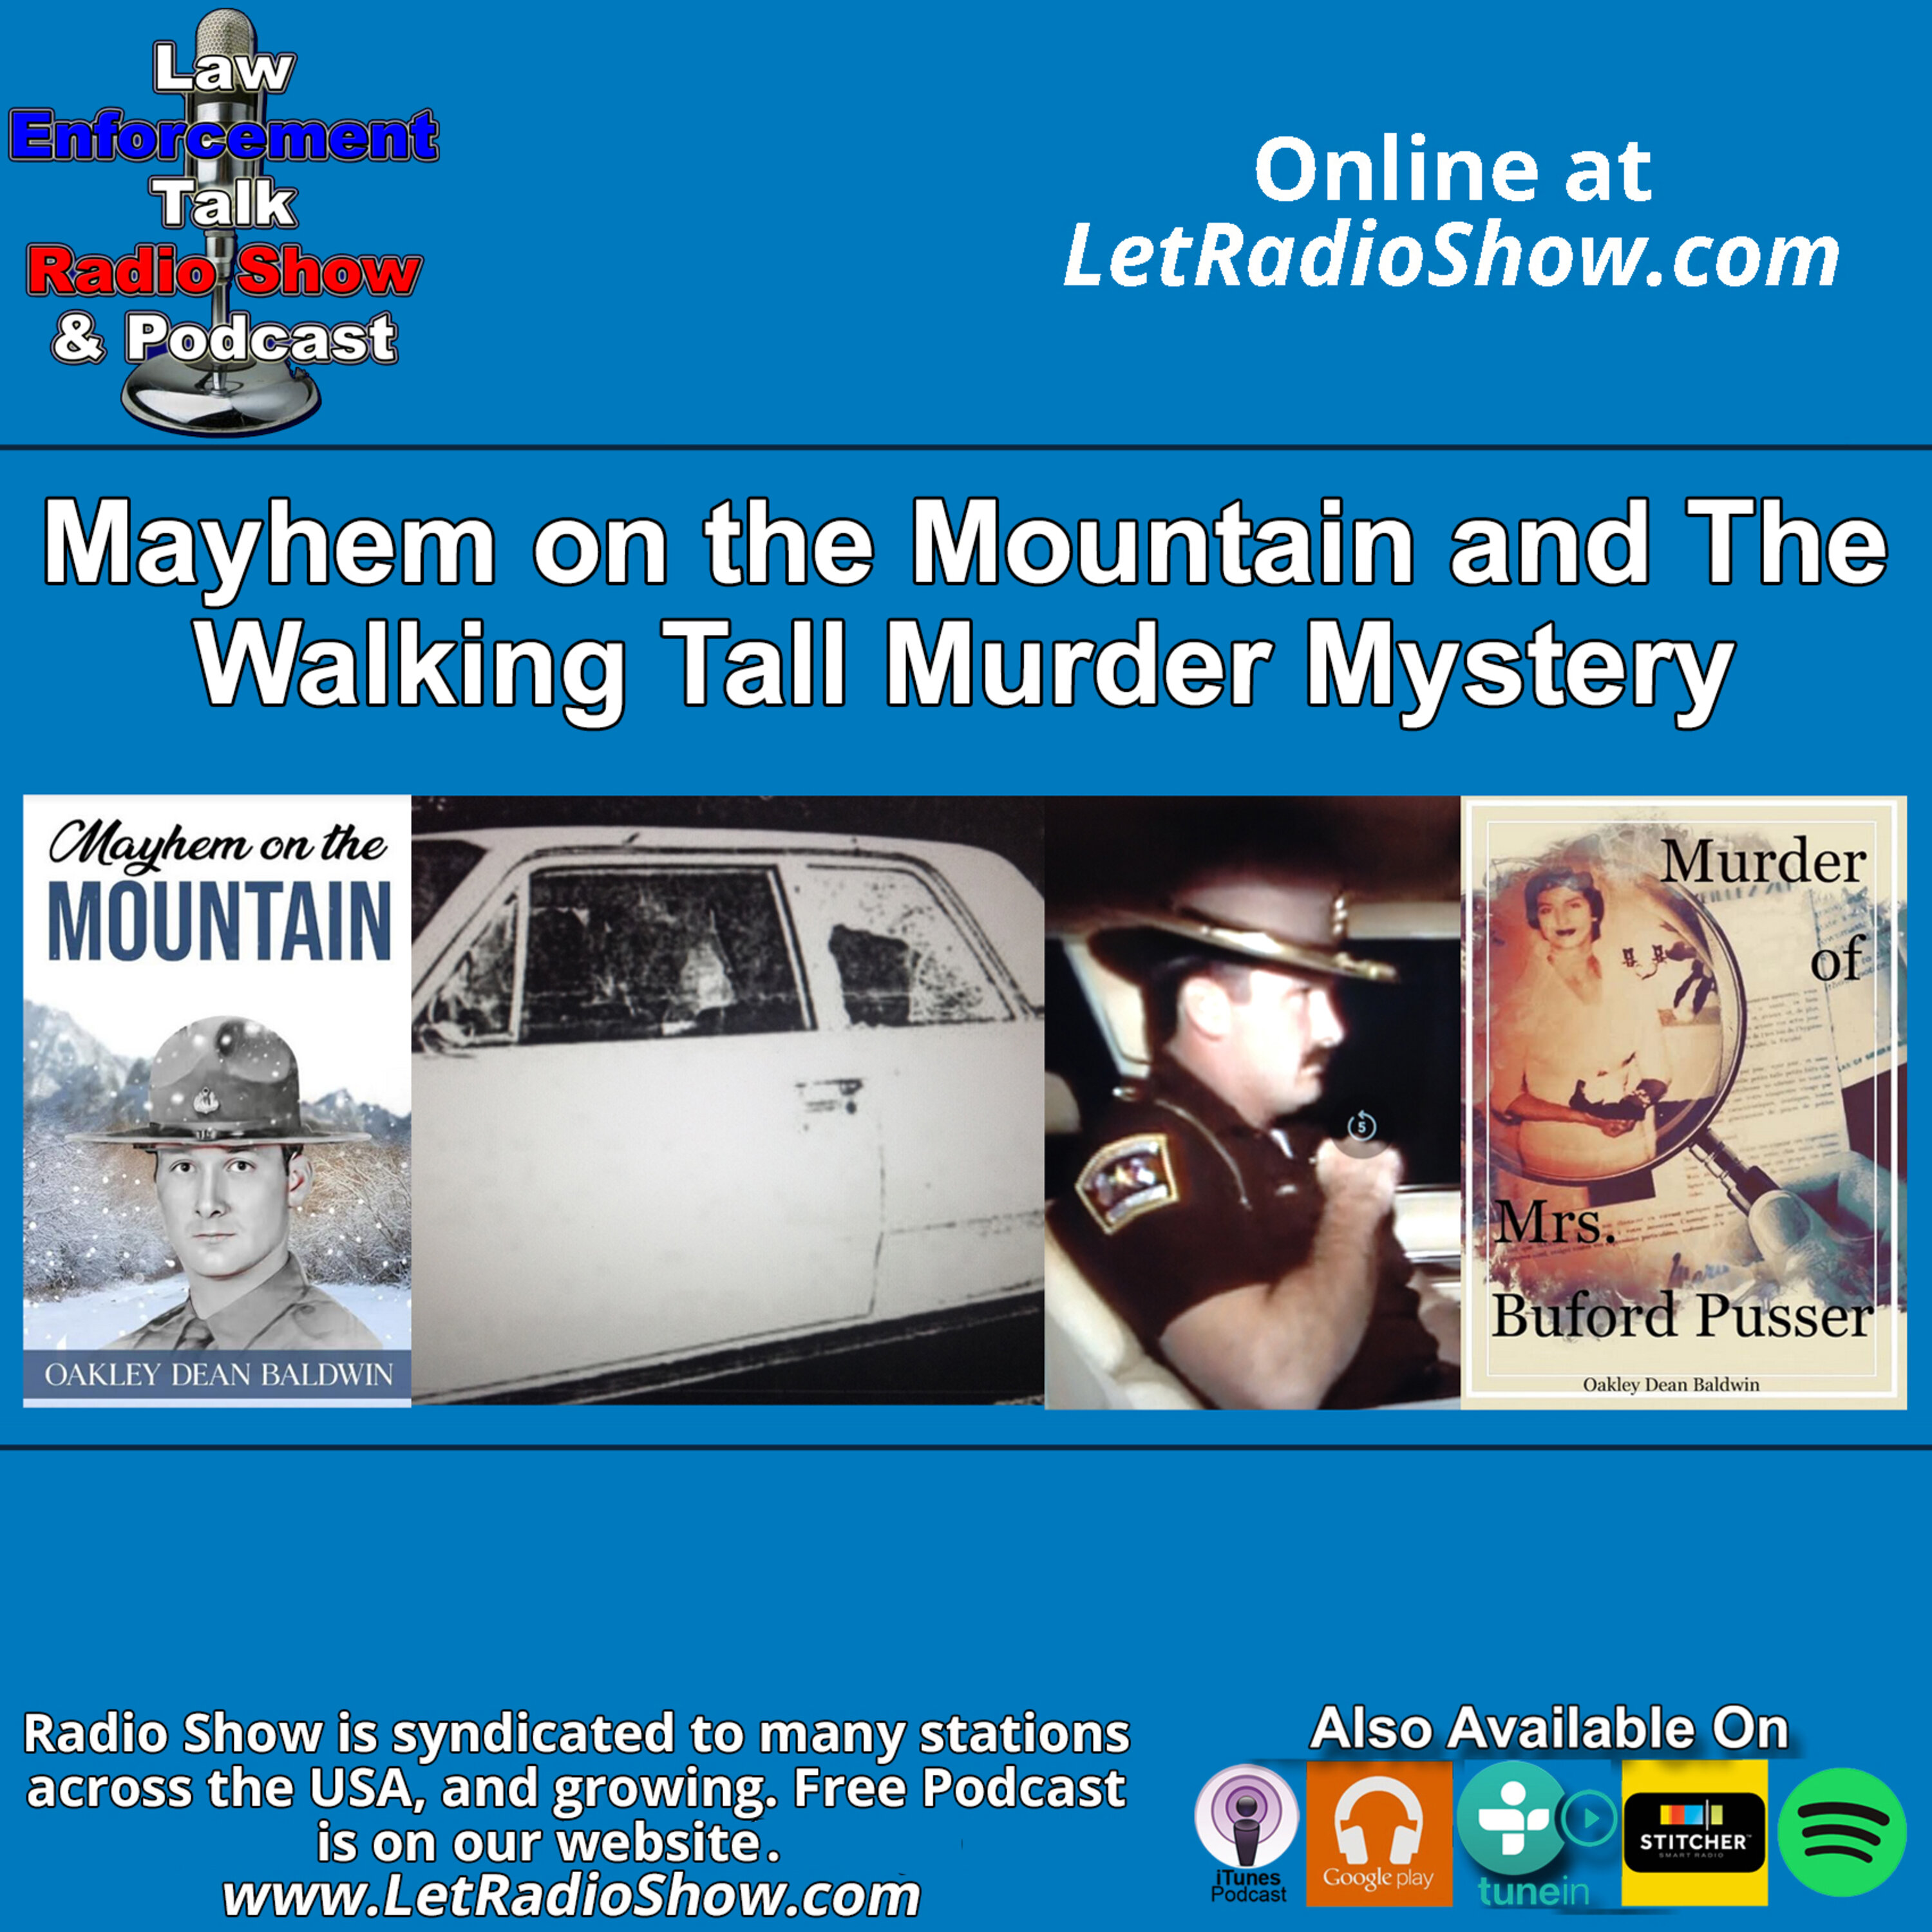 Mayhem on the Mountain and The Walking Tall Murder Mystery